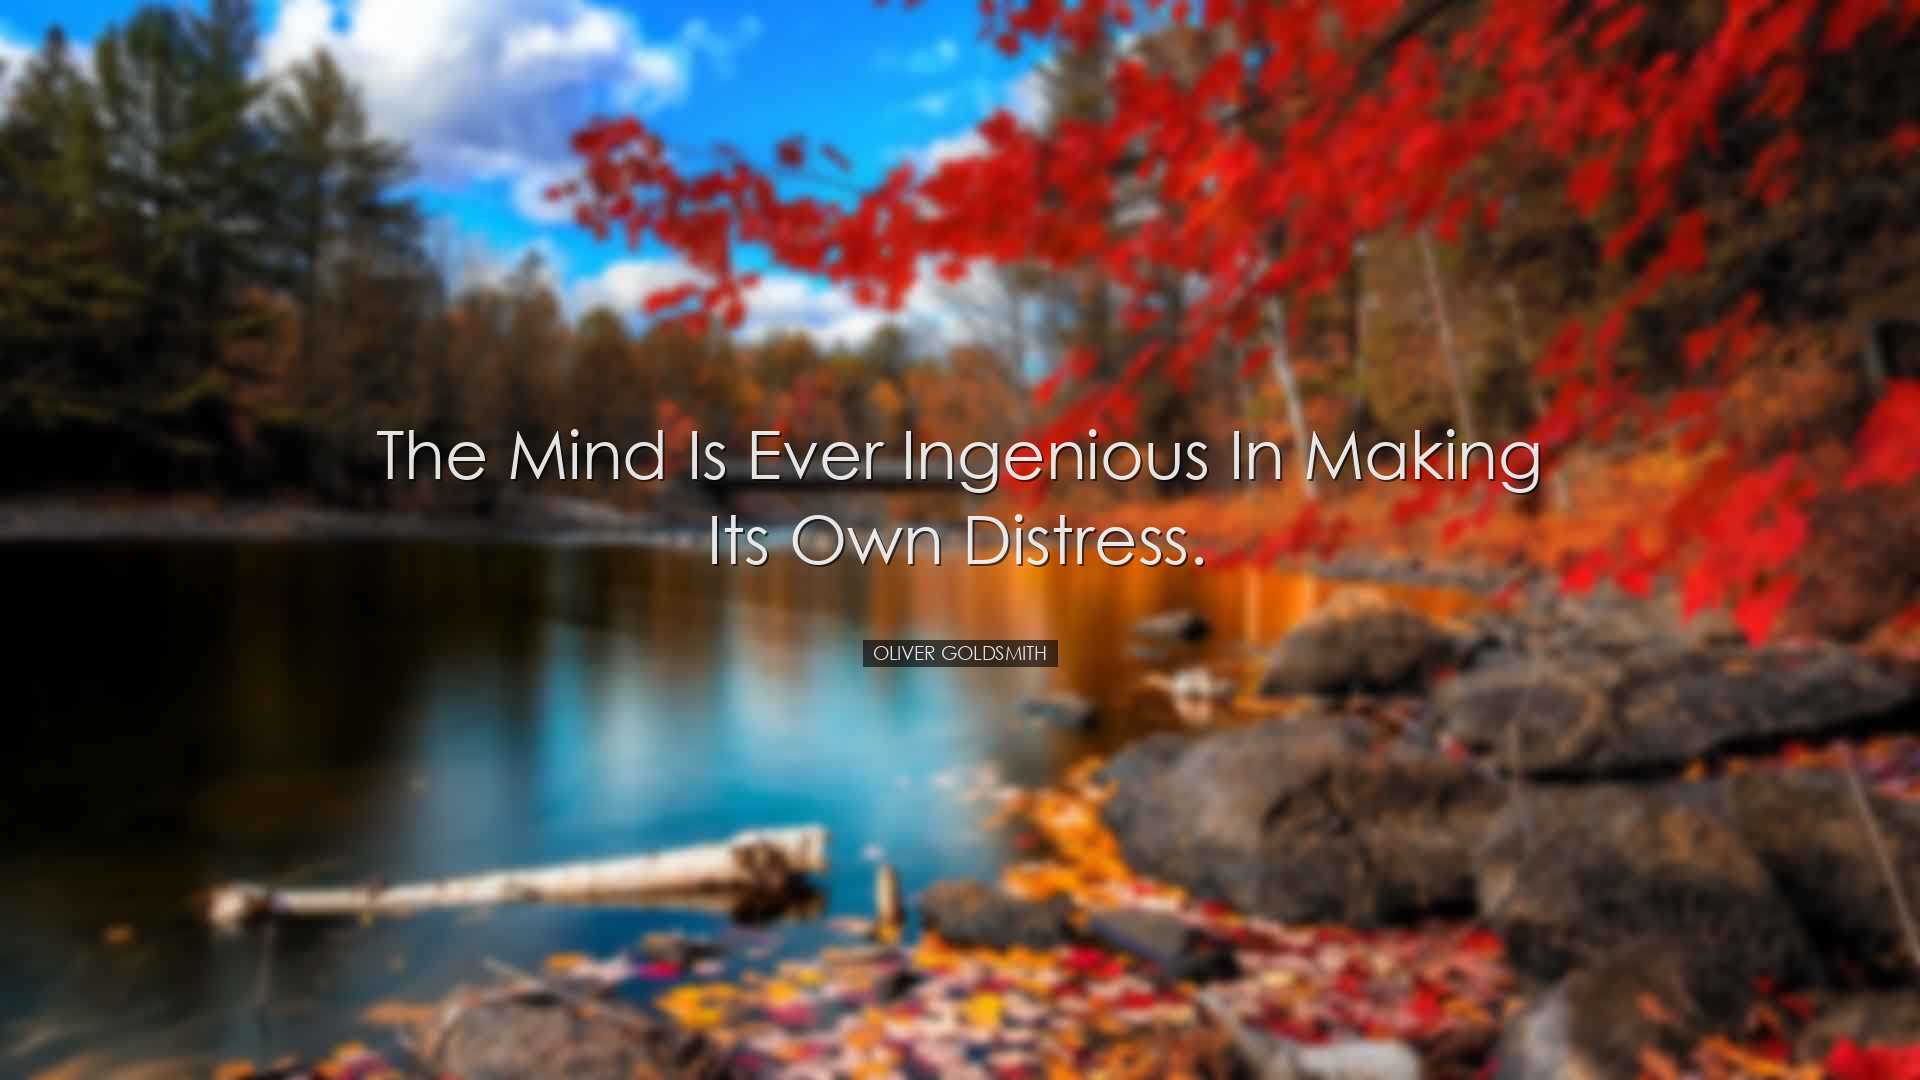 The mind is ever ingenious in making its own distress. - Oliver Go